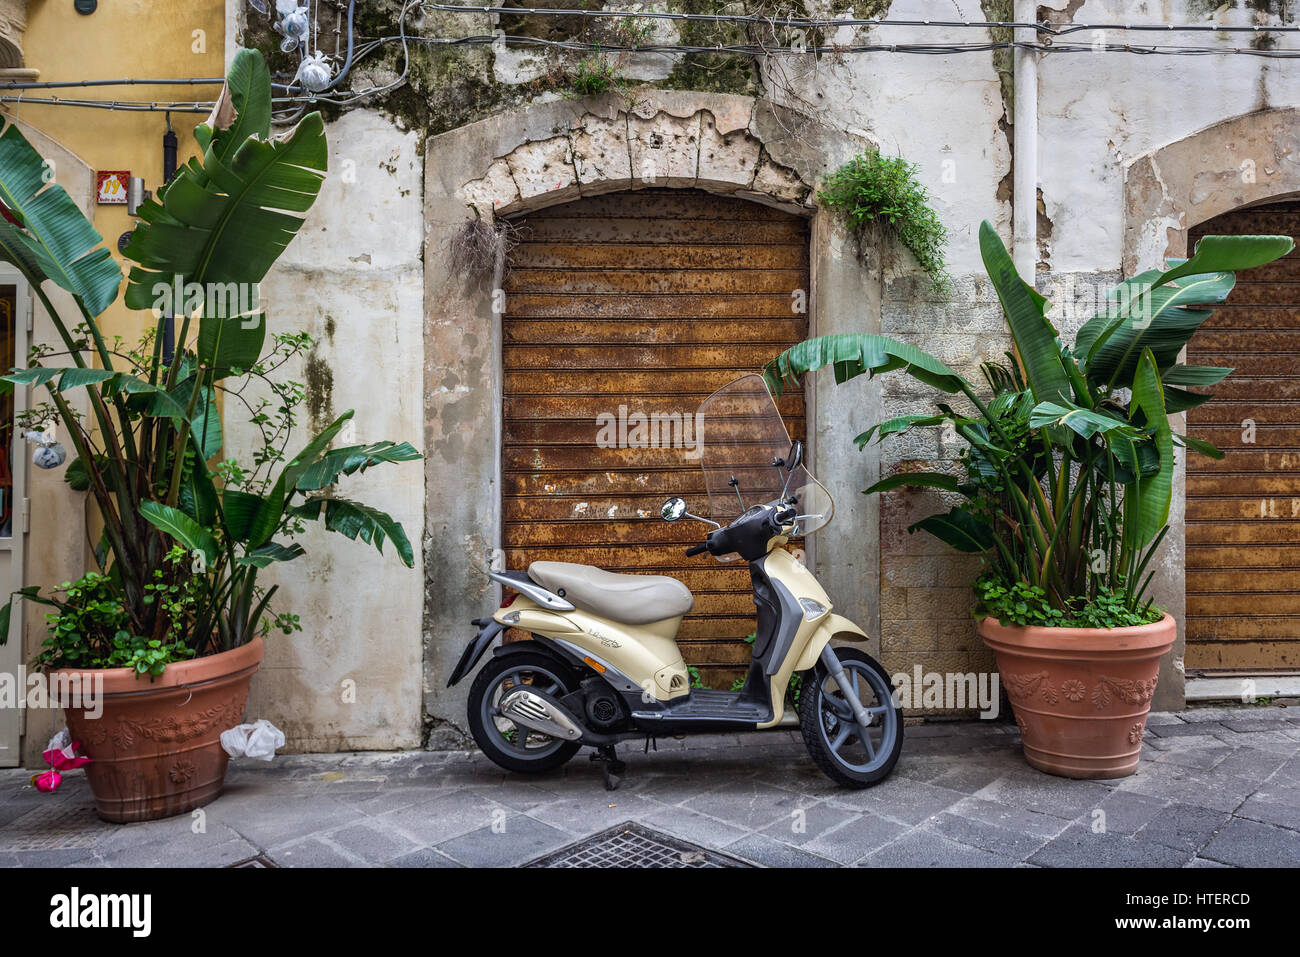 Piaggio Liberty 125 scooter on the Ortygia island, historical part of Syracuse city, southeast corner of the island of Sicily, Italy Stock Photo